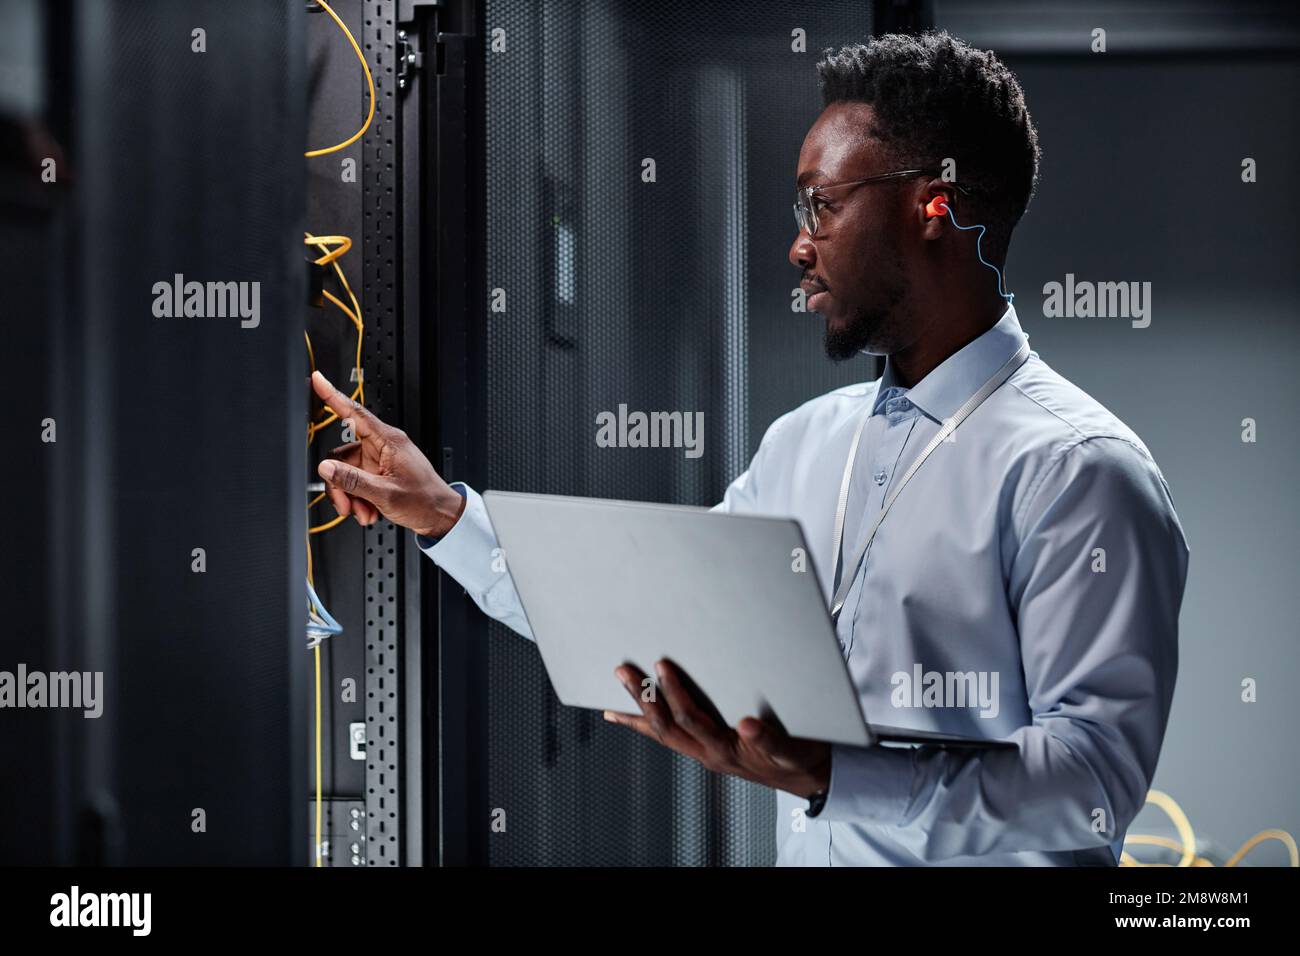 Side view portrait of young black man as network engineer working with servers in data center and holding laptop Stock Photo